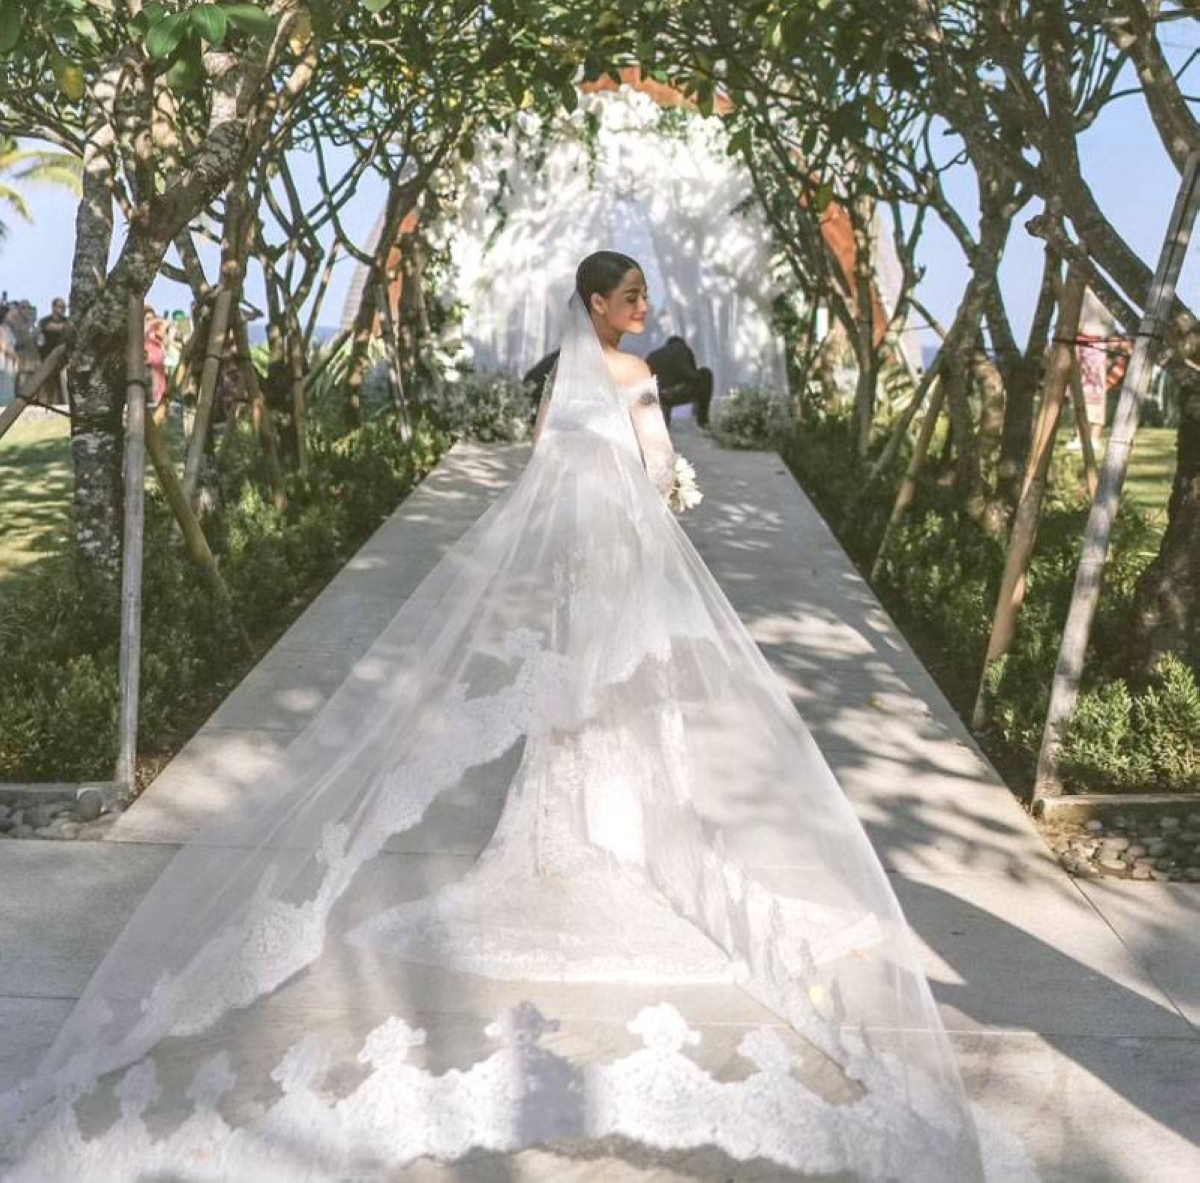 The blooming bride wearing an elegant white gown by Lebanese fashion designer Zuhair Murad. INSTAGRAM PHOTOS/PATDY11